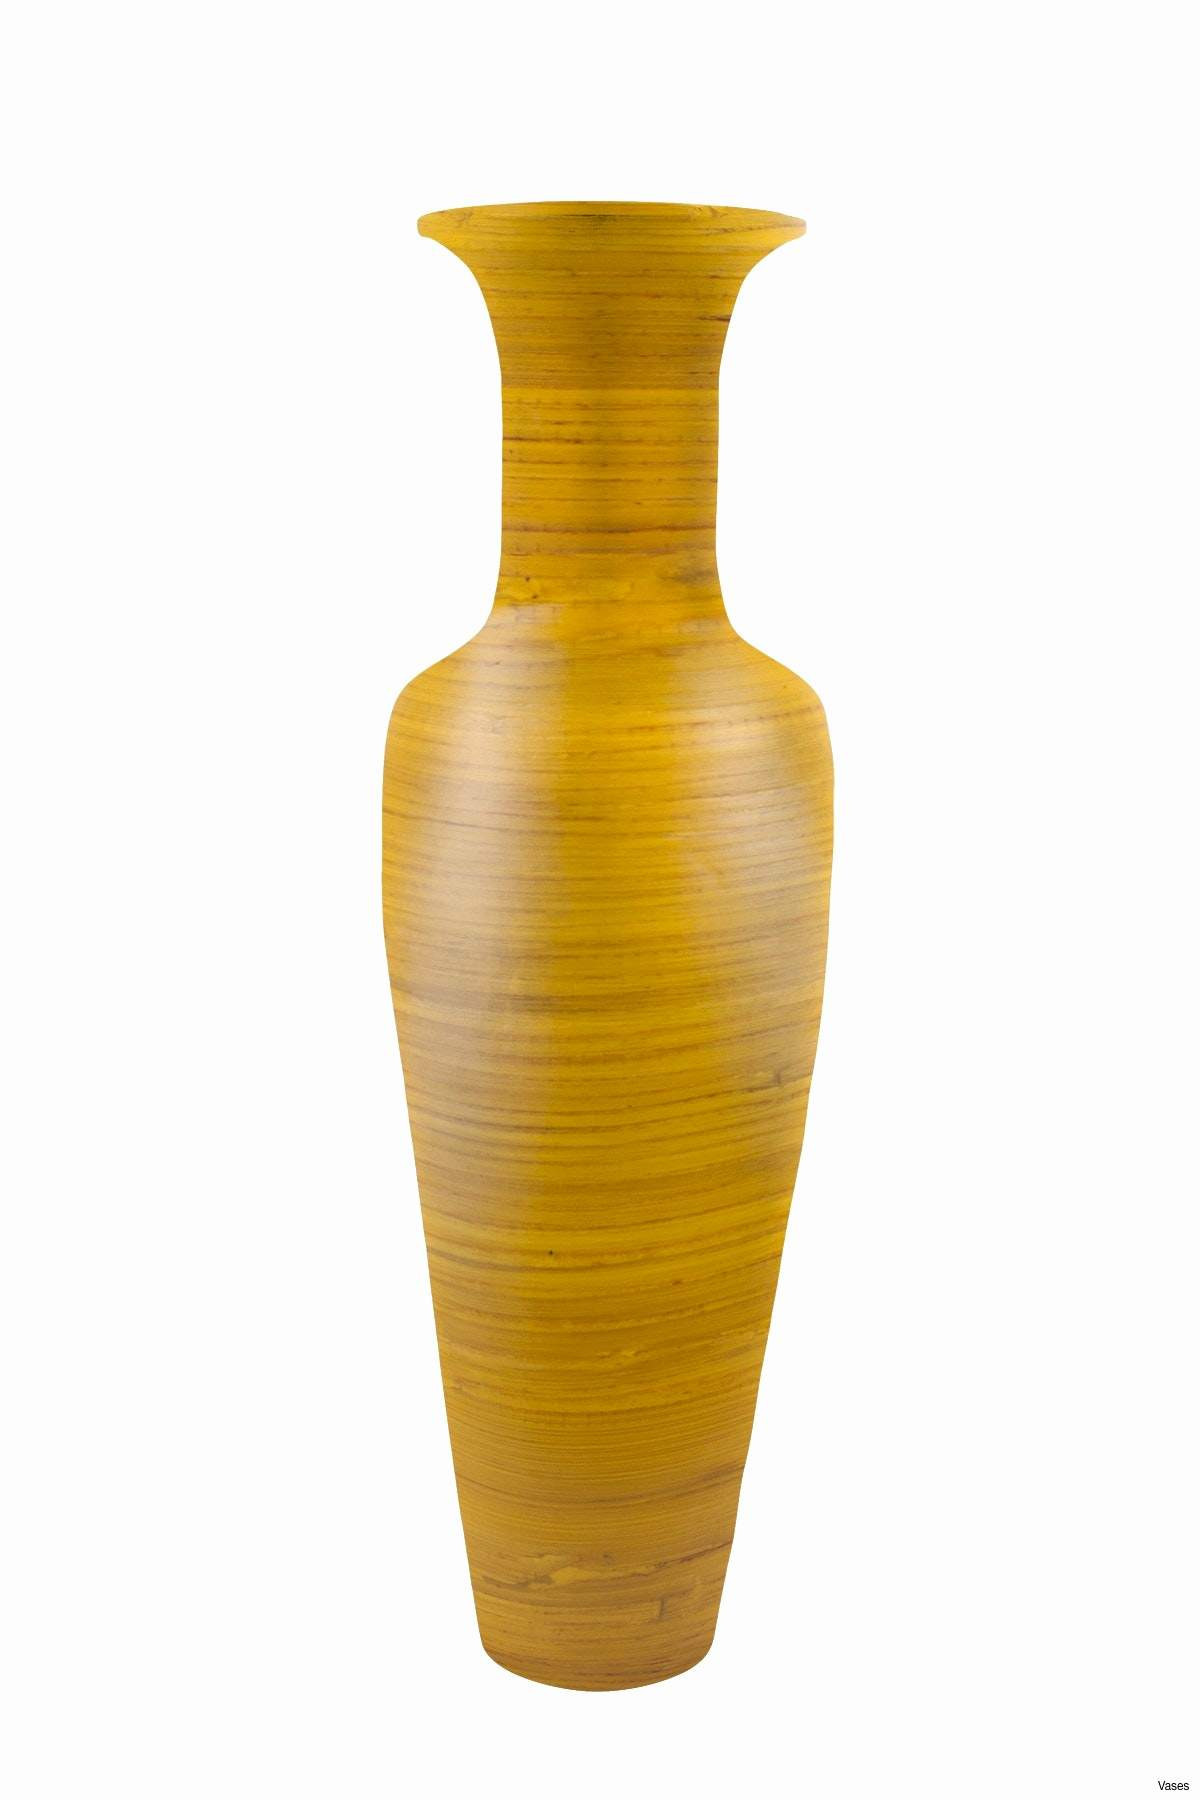 21 Fabulous Yellow Pottery Vase 2024 free download yellow pottery vase of ceramic vase set collection area floor rugs new joaquin gray vases with area floor rugs new joaquin gray vases set 3 2h pottery floor i 0d